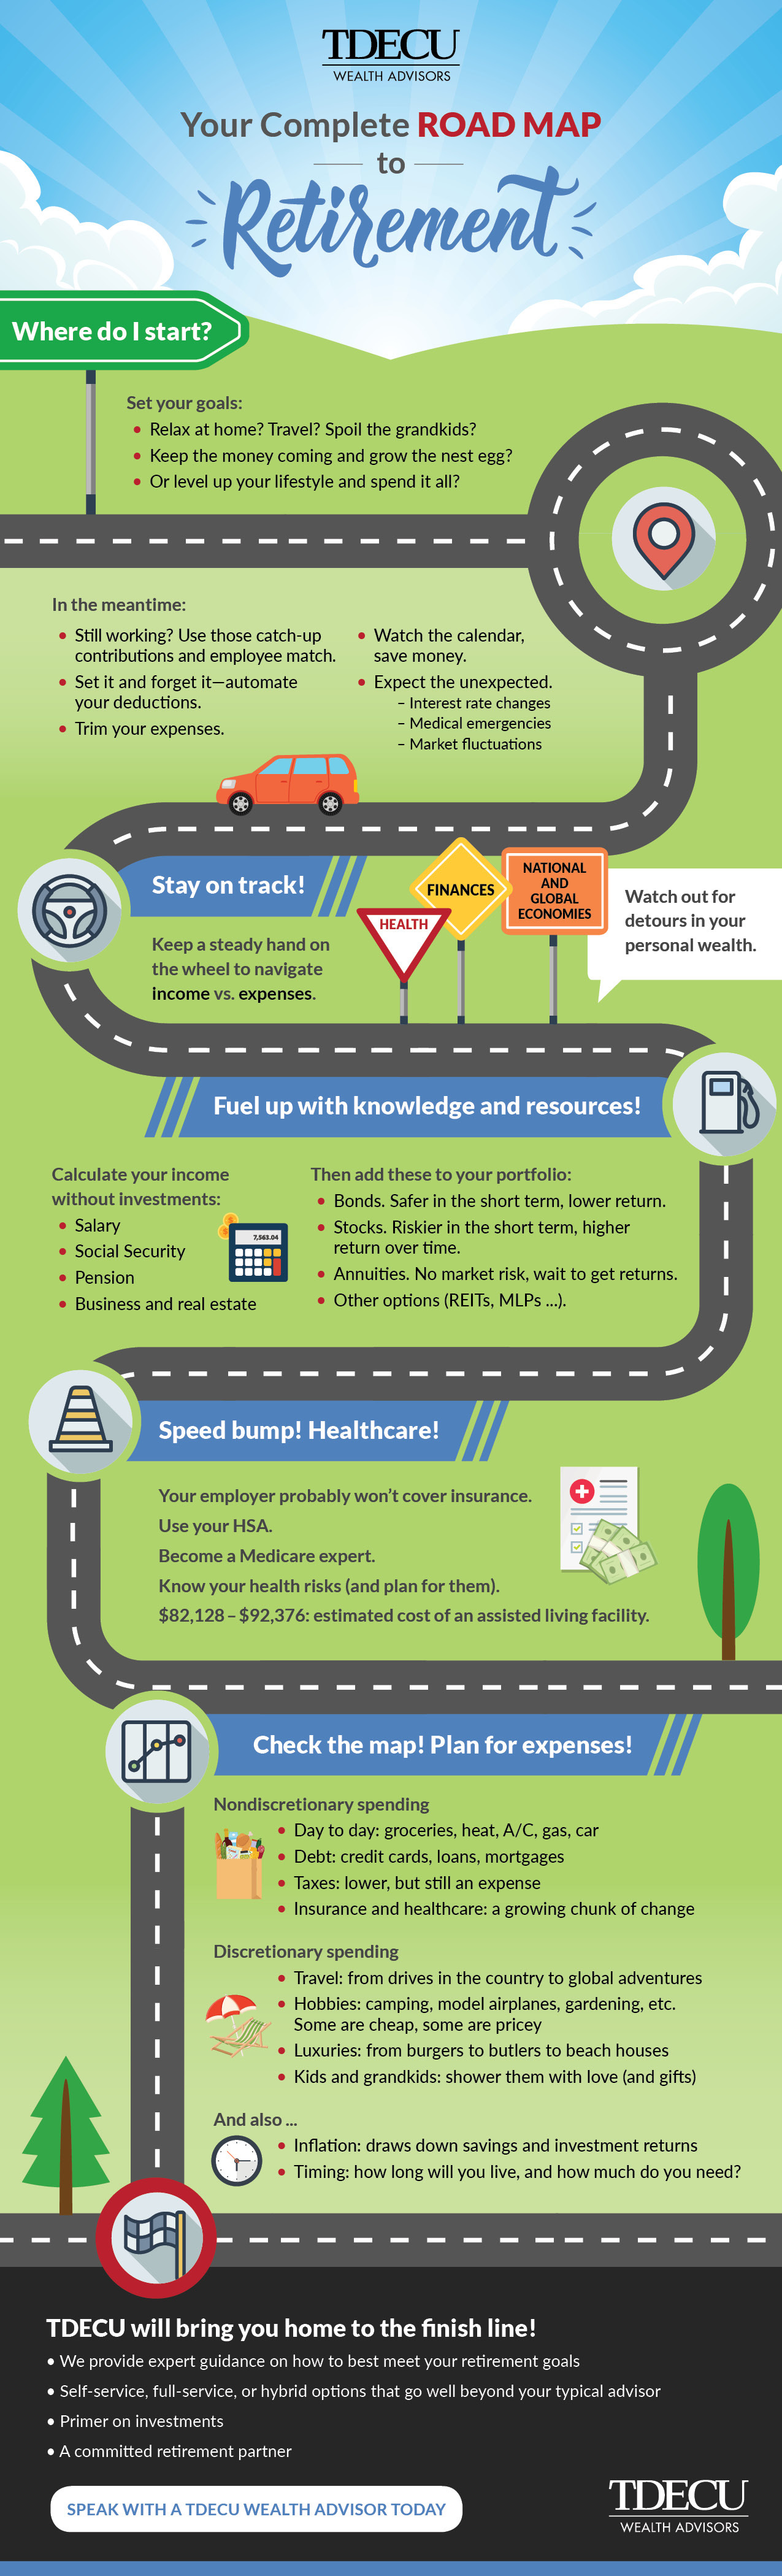 Infographic: Your Complete Road Map to Retirement